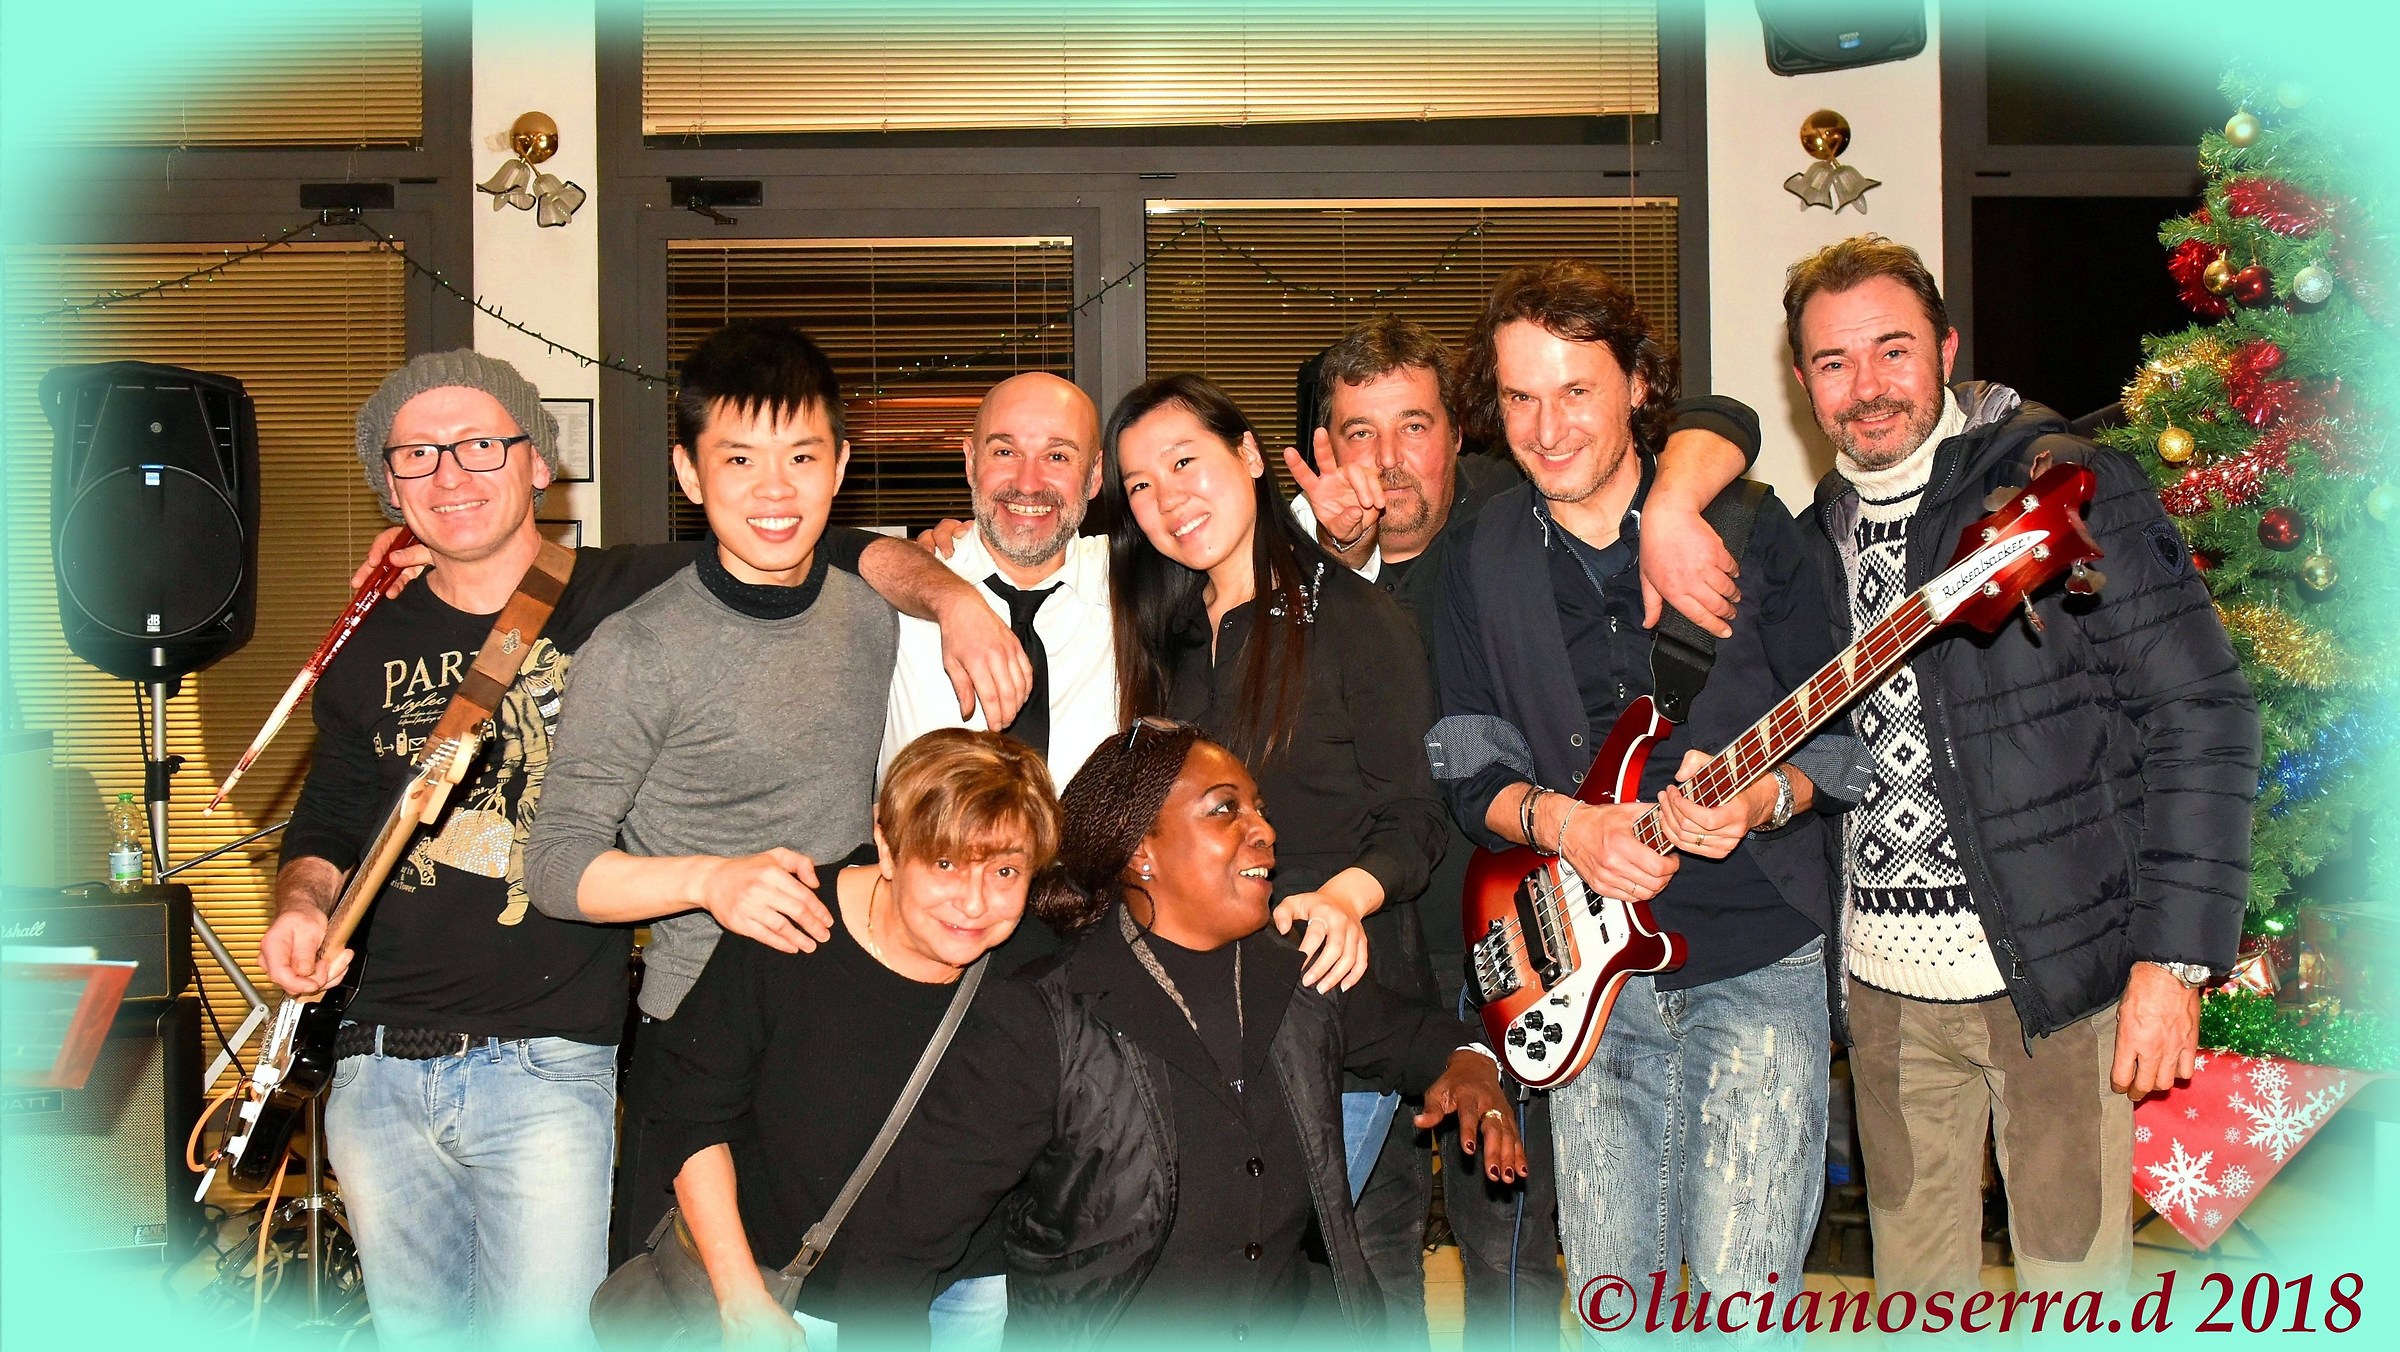 Club 27 Band ... with the fans ......